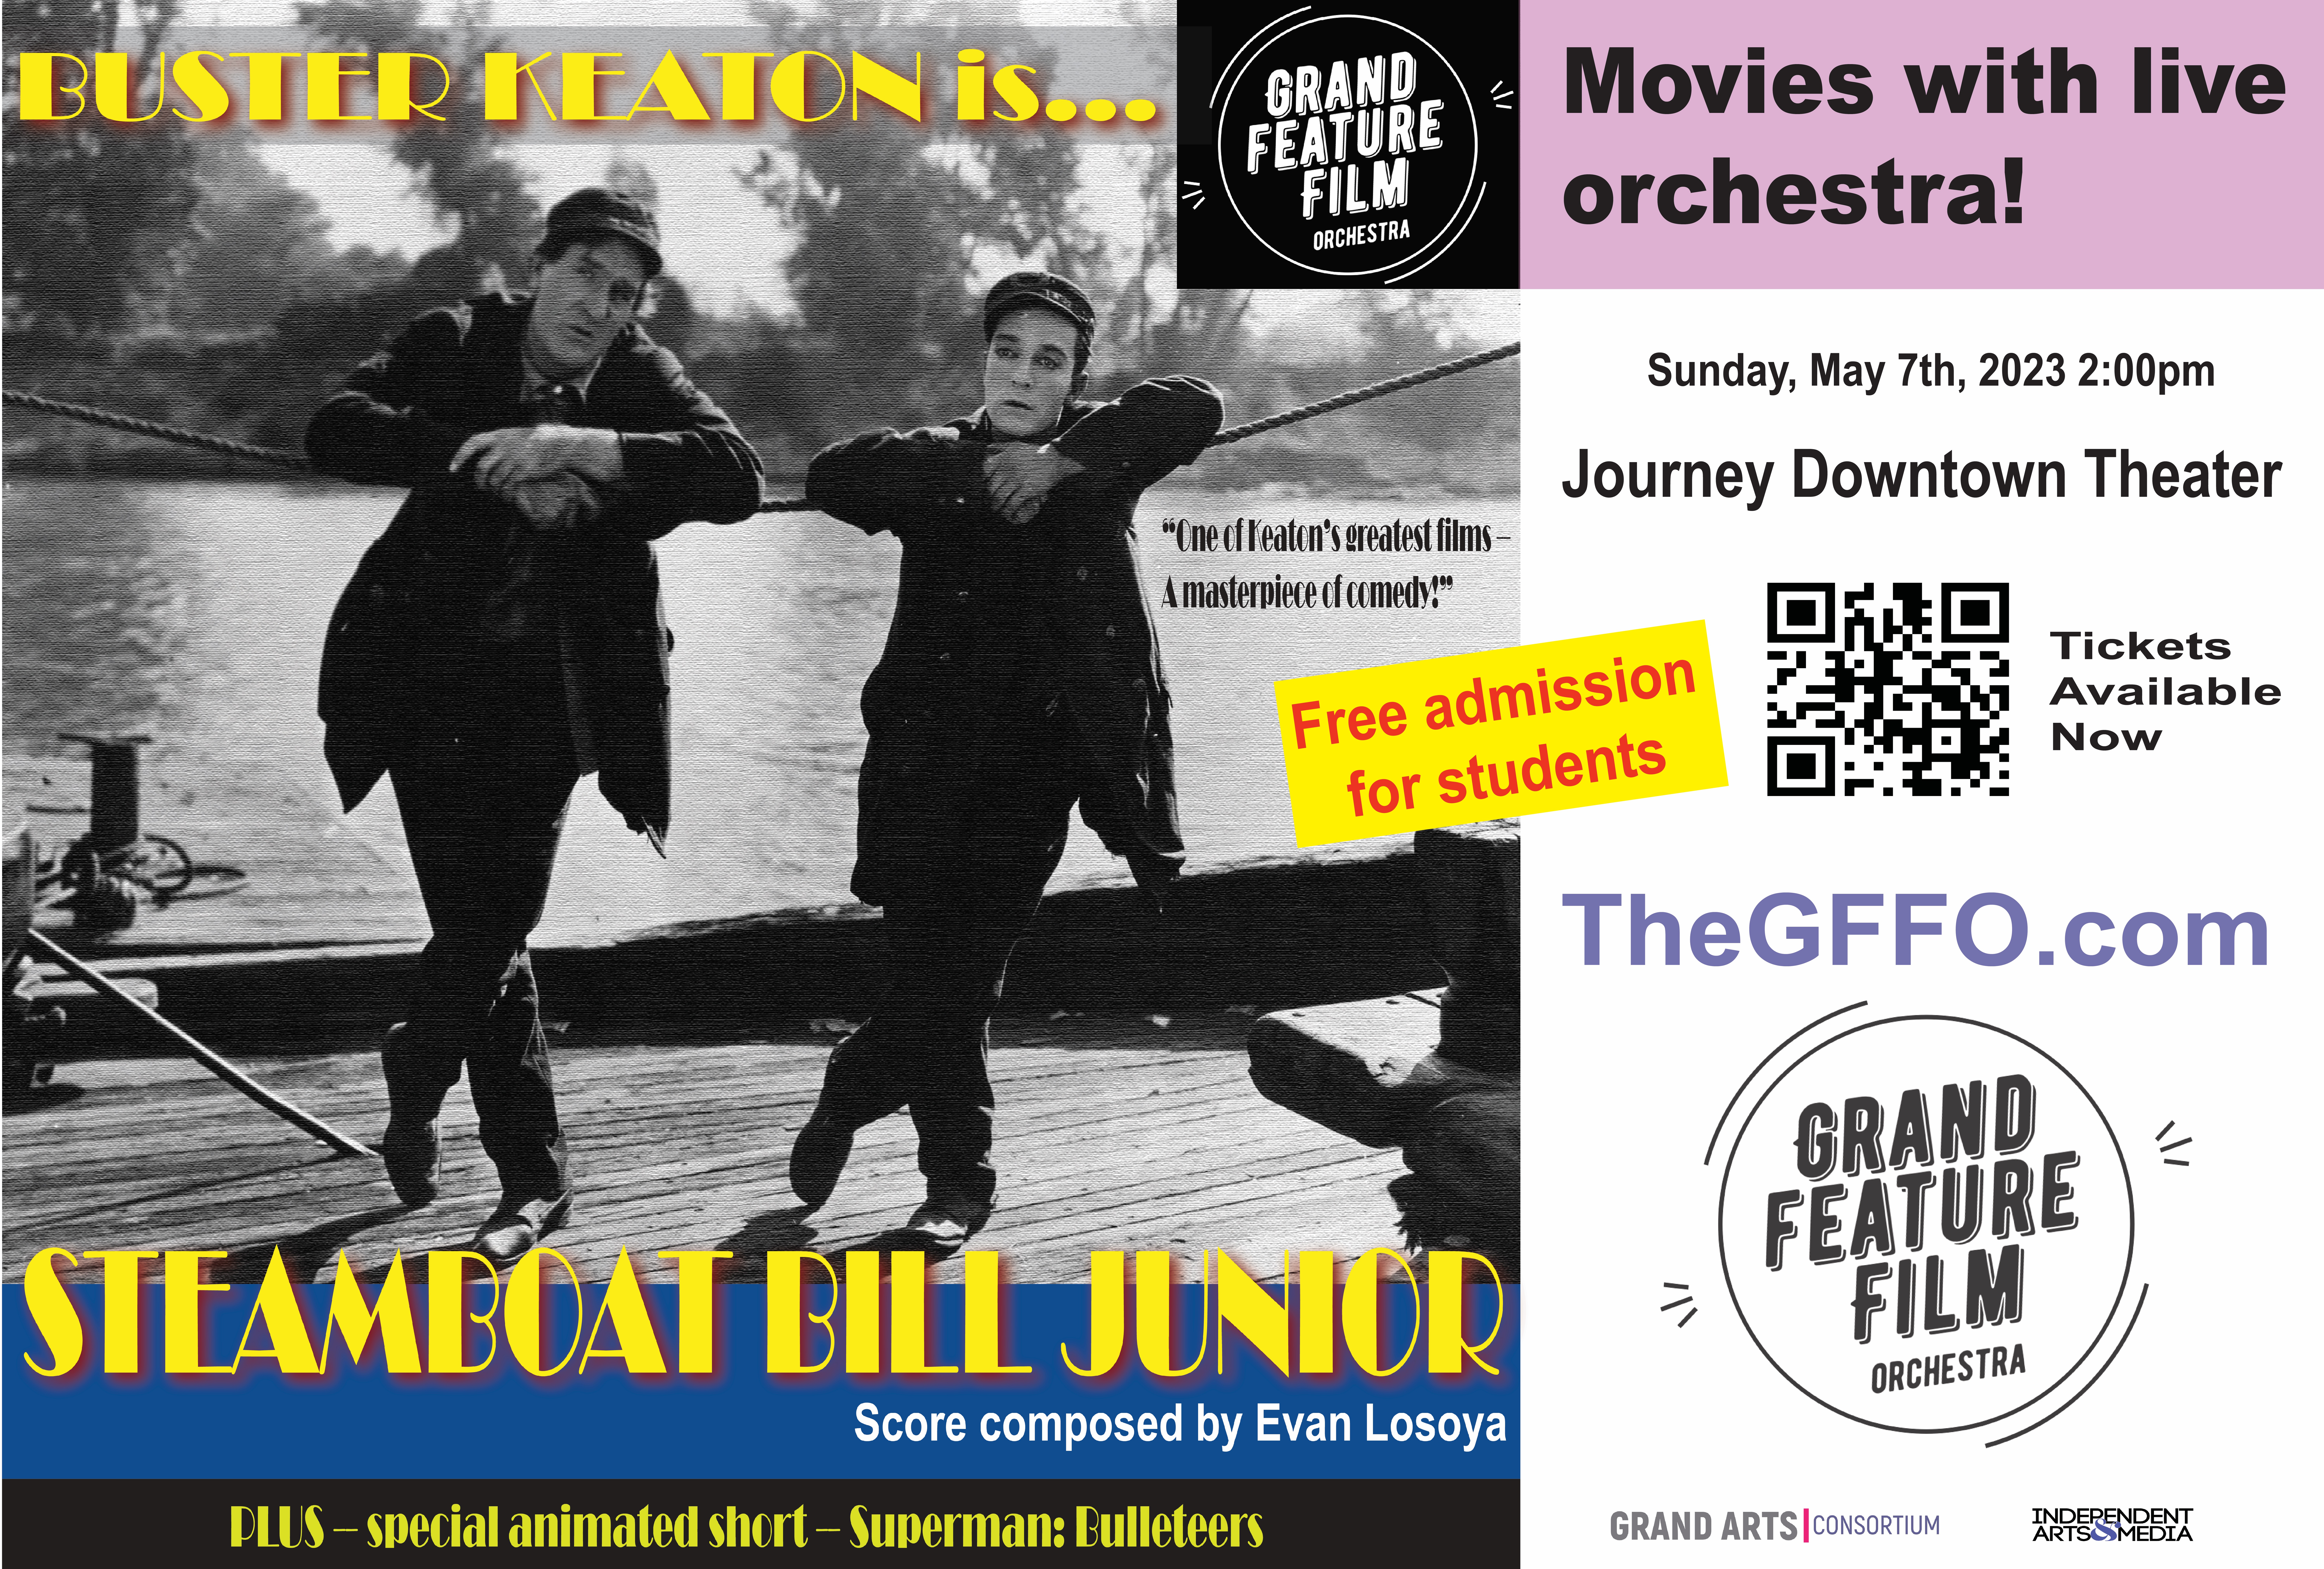 <h1 class="tribe-events-single-event-title">Vacaville: Grand Feature Film Orchestra – Live music with the movie – Keaton’s Steamboat Bill Jr. plus Superman: Bulleteers 1942</h1>